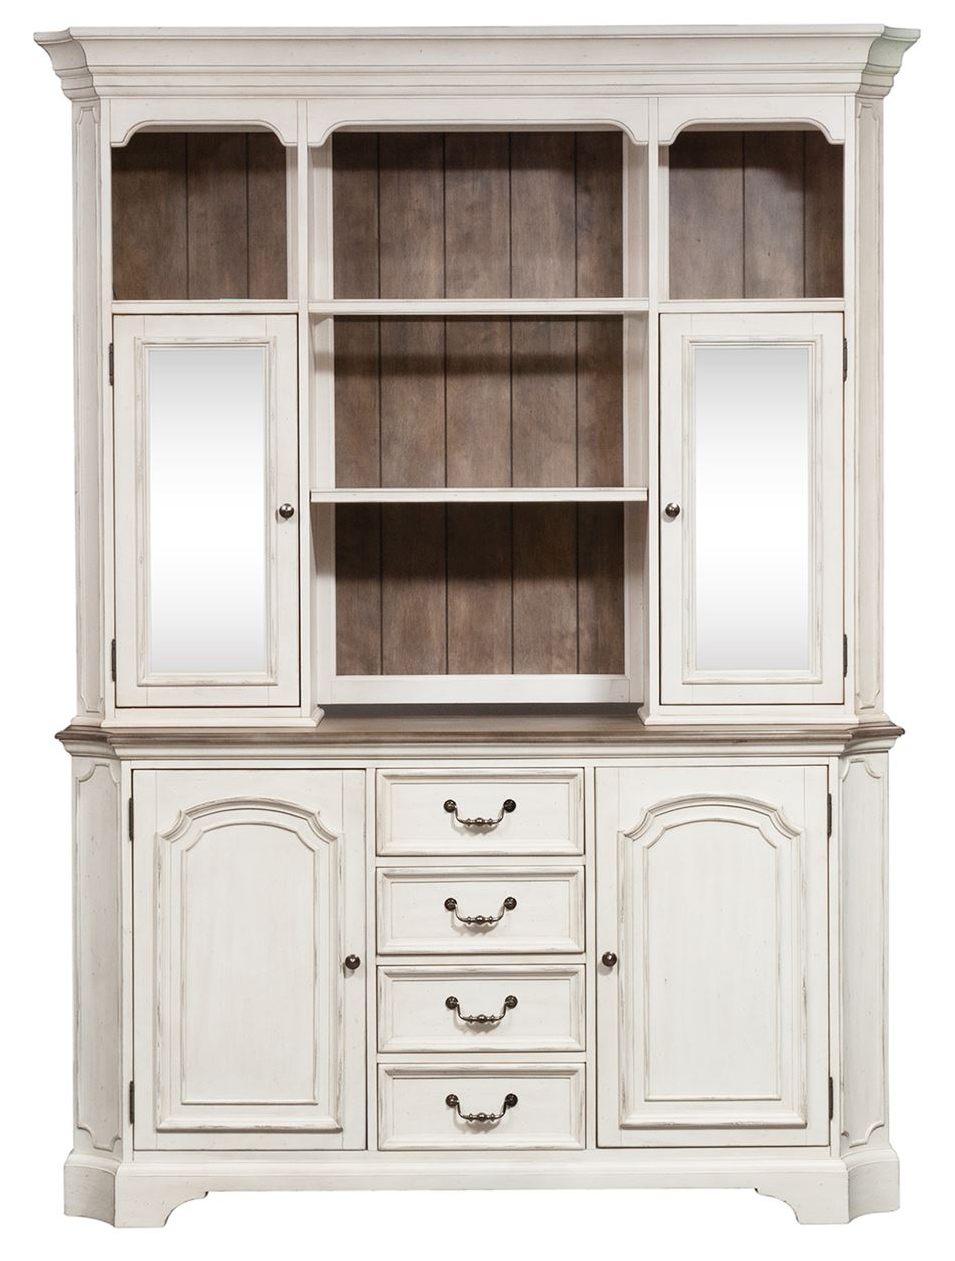 Liberty Furniture Abbey Road Porcelain White Dining Hutch & Buffet